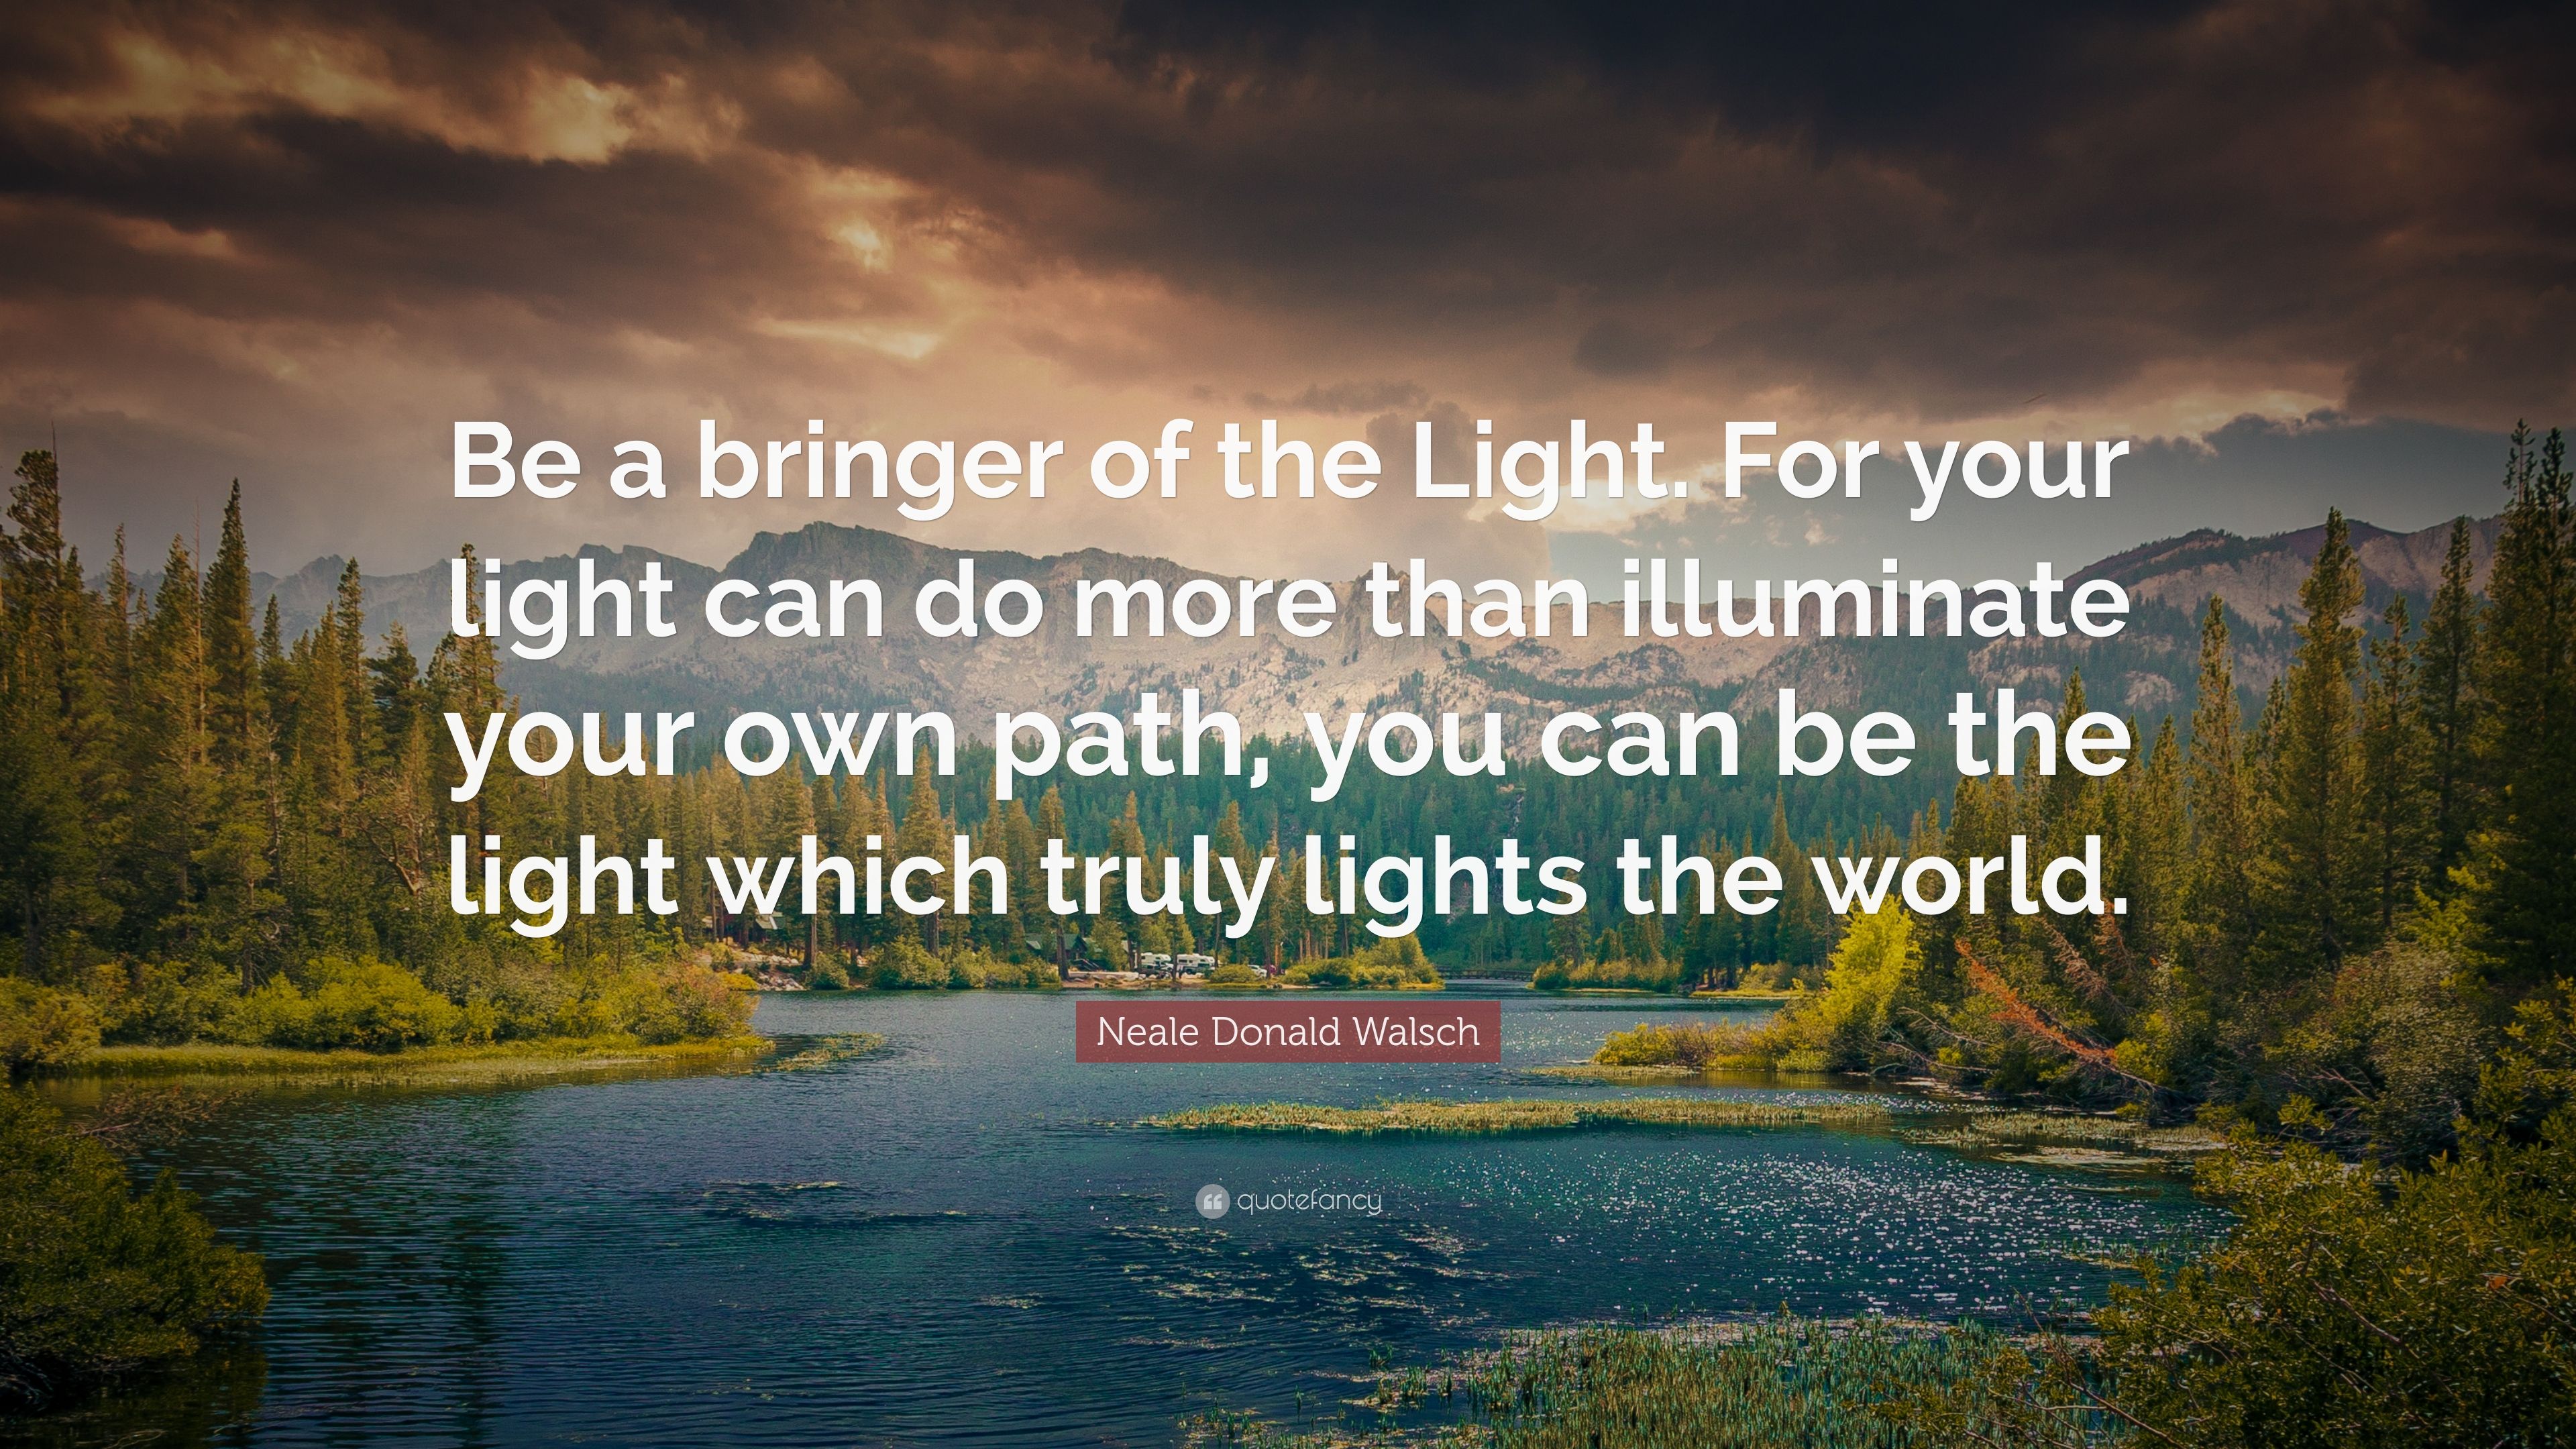 Neale Donald Walsch Quote: “Be a bringer of the Light. For your